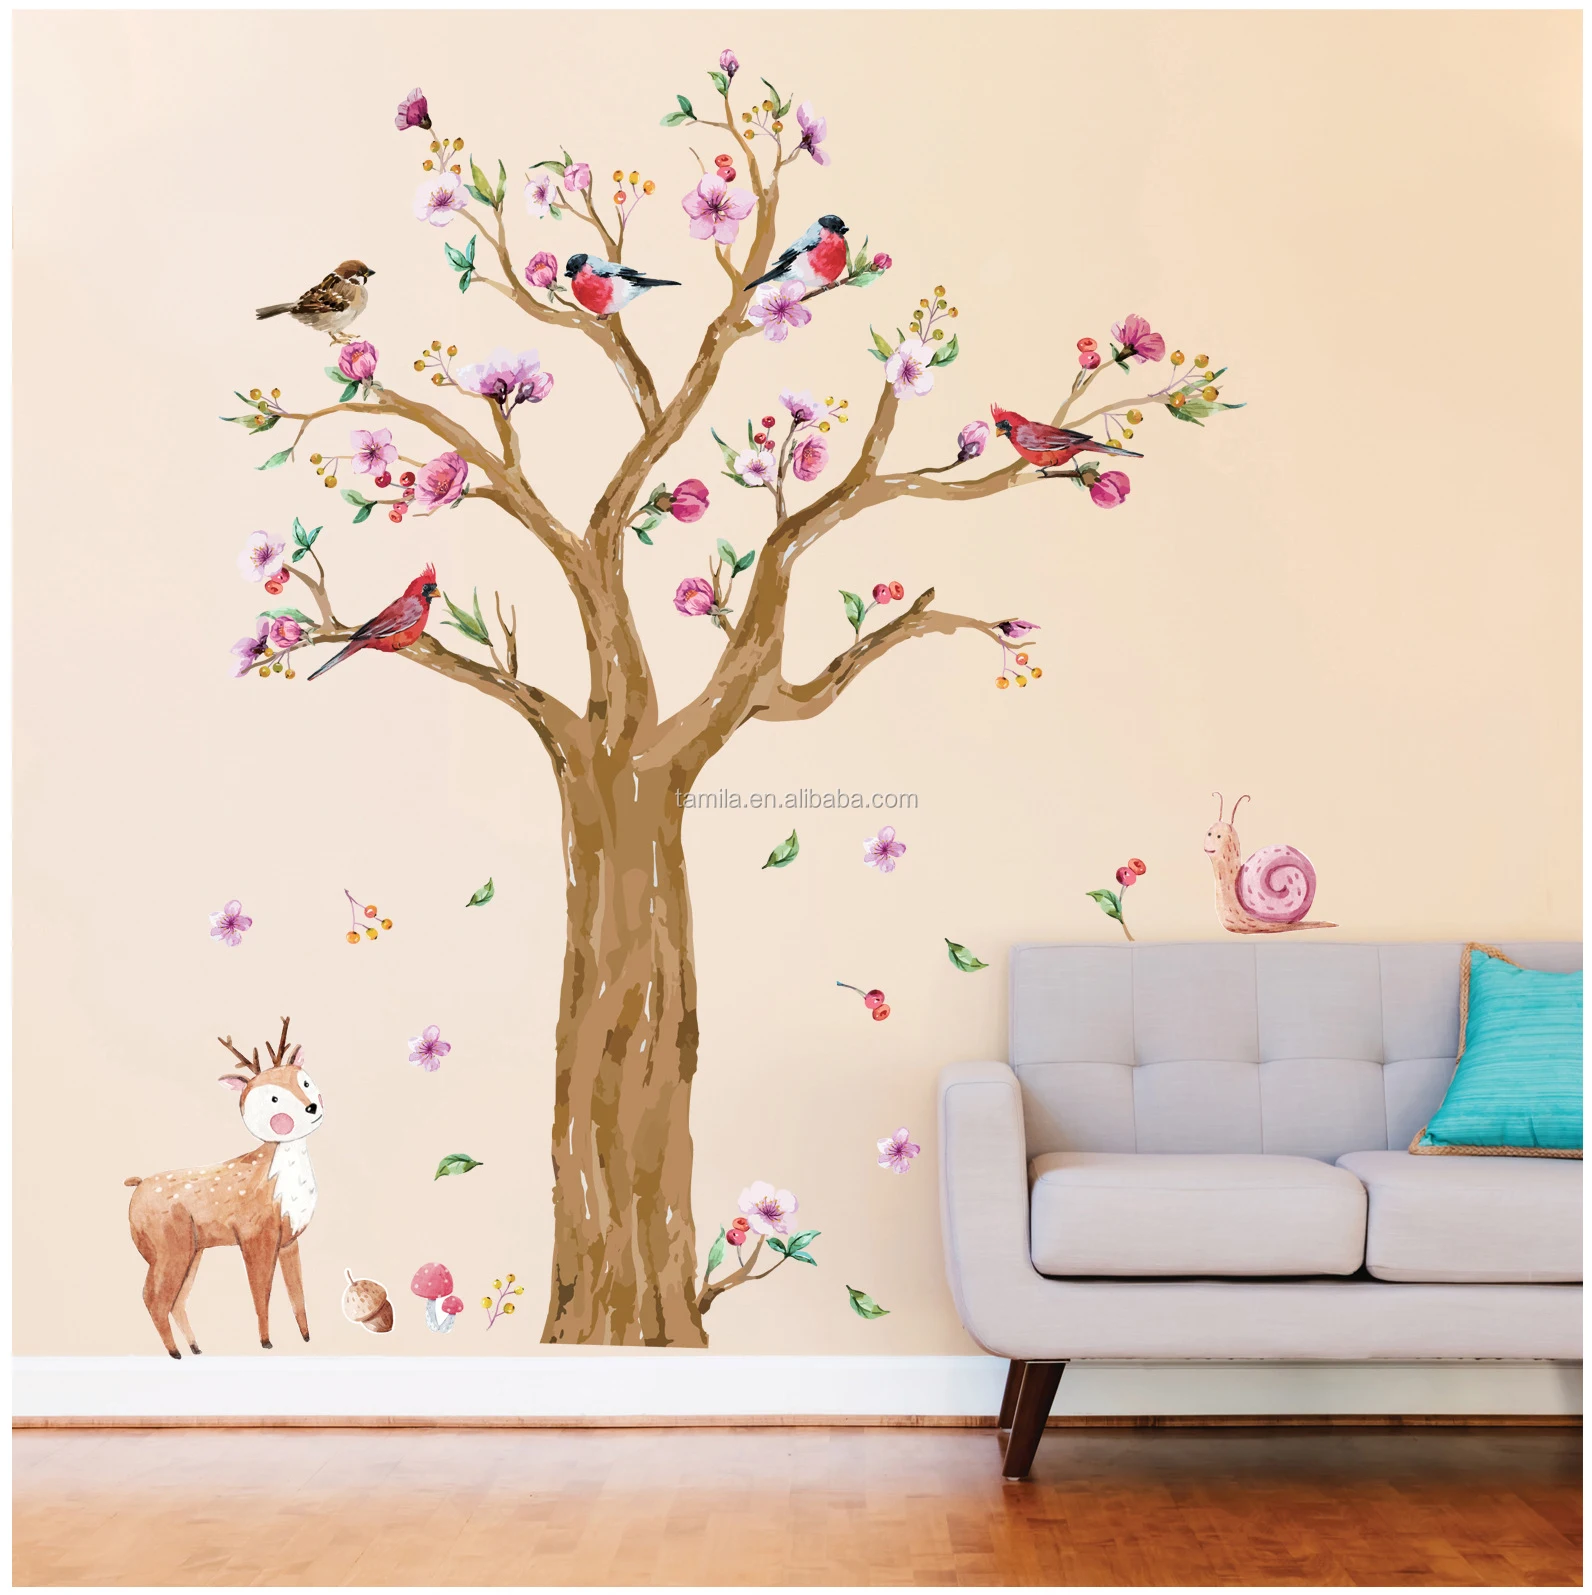 Wall Tattoo Tree Family Tree Wall Sticker Living Room Picture Frame 15 x 20  13 x 18 10 x 15 A4 Photo Wall 3D DIY Wall Sticker Wall Decoration Wall  Tattoo Tree